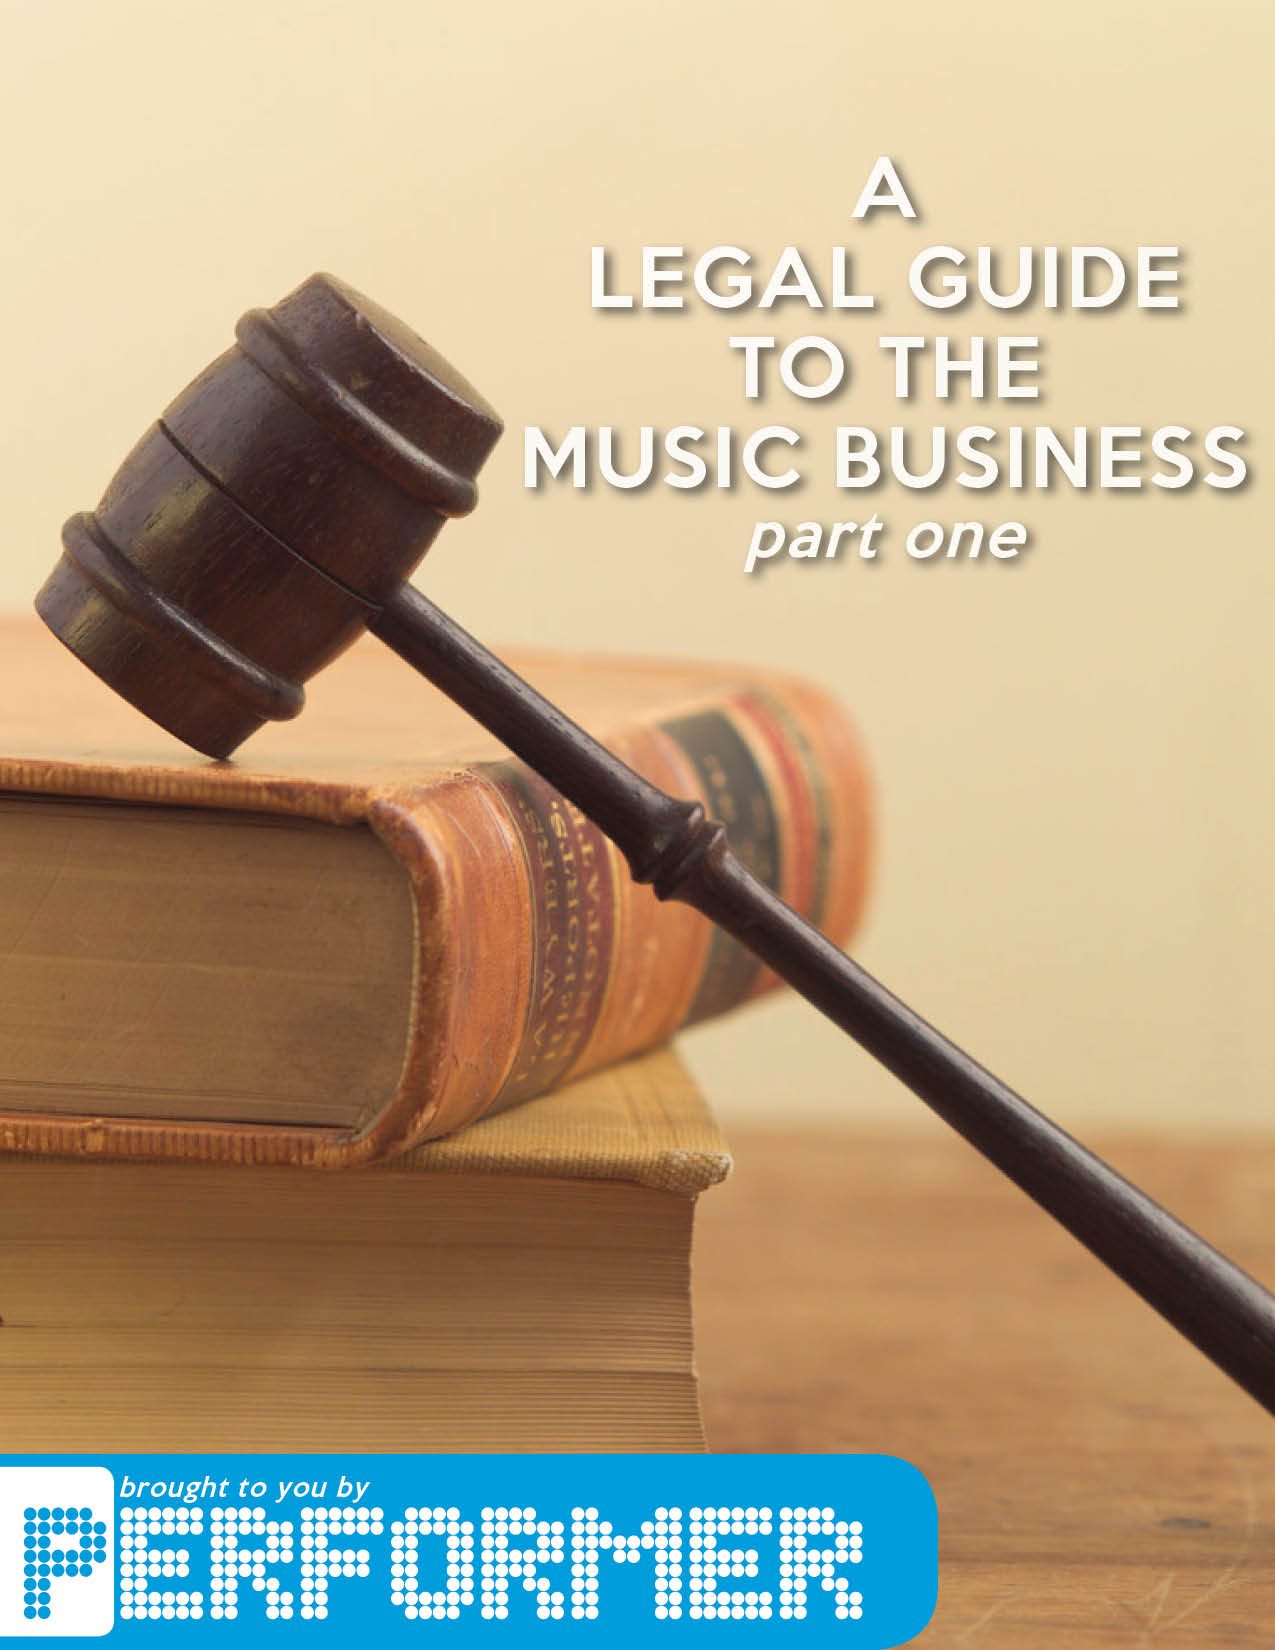 Download Performer’s FREE Legal Guide to the Music Business